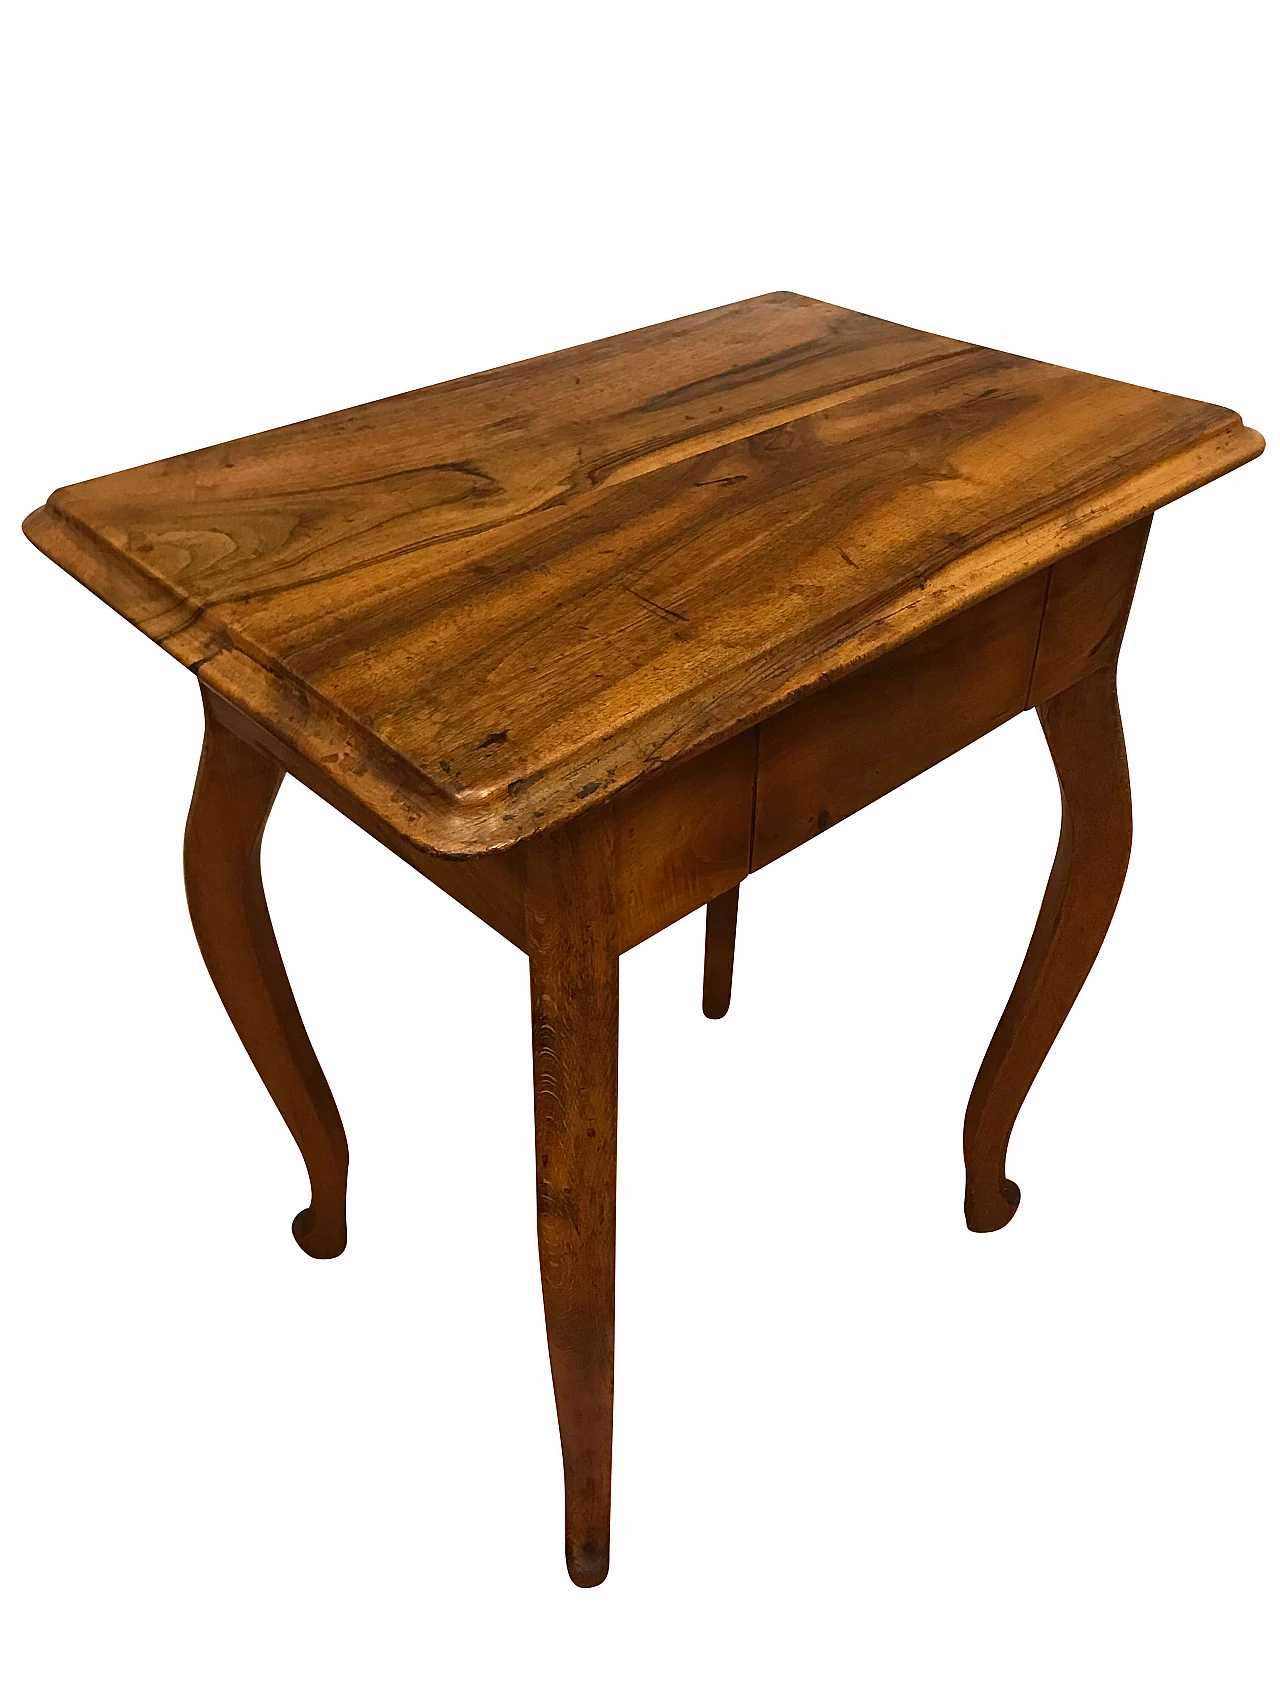 Antique Piedmontese side table in walnut with concealed drawer, original early 19th century 1221735